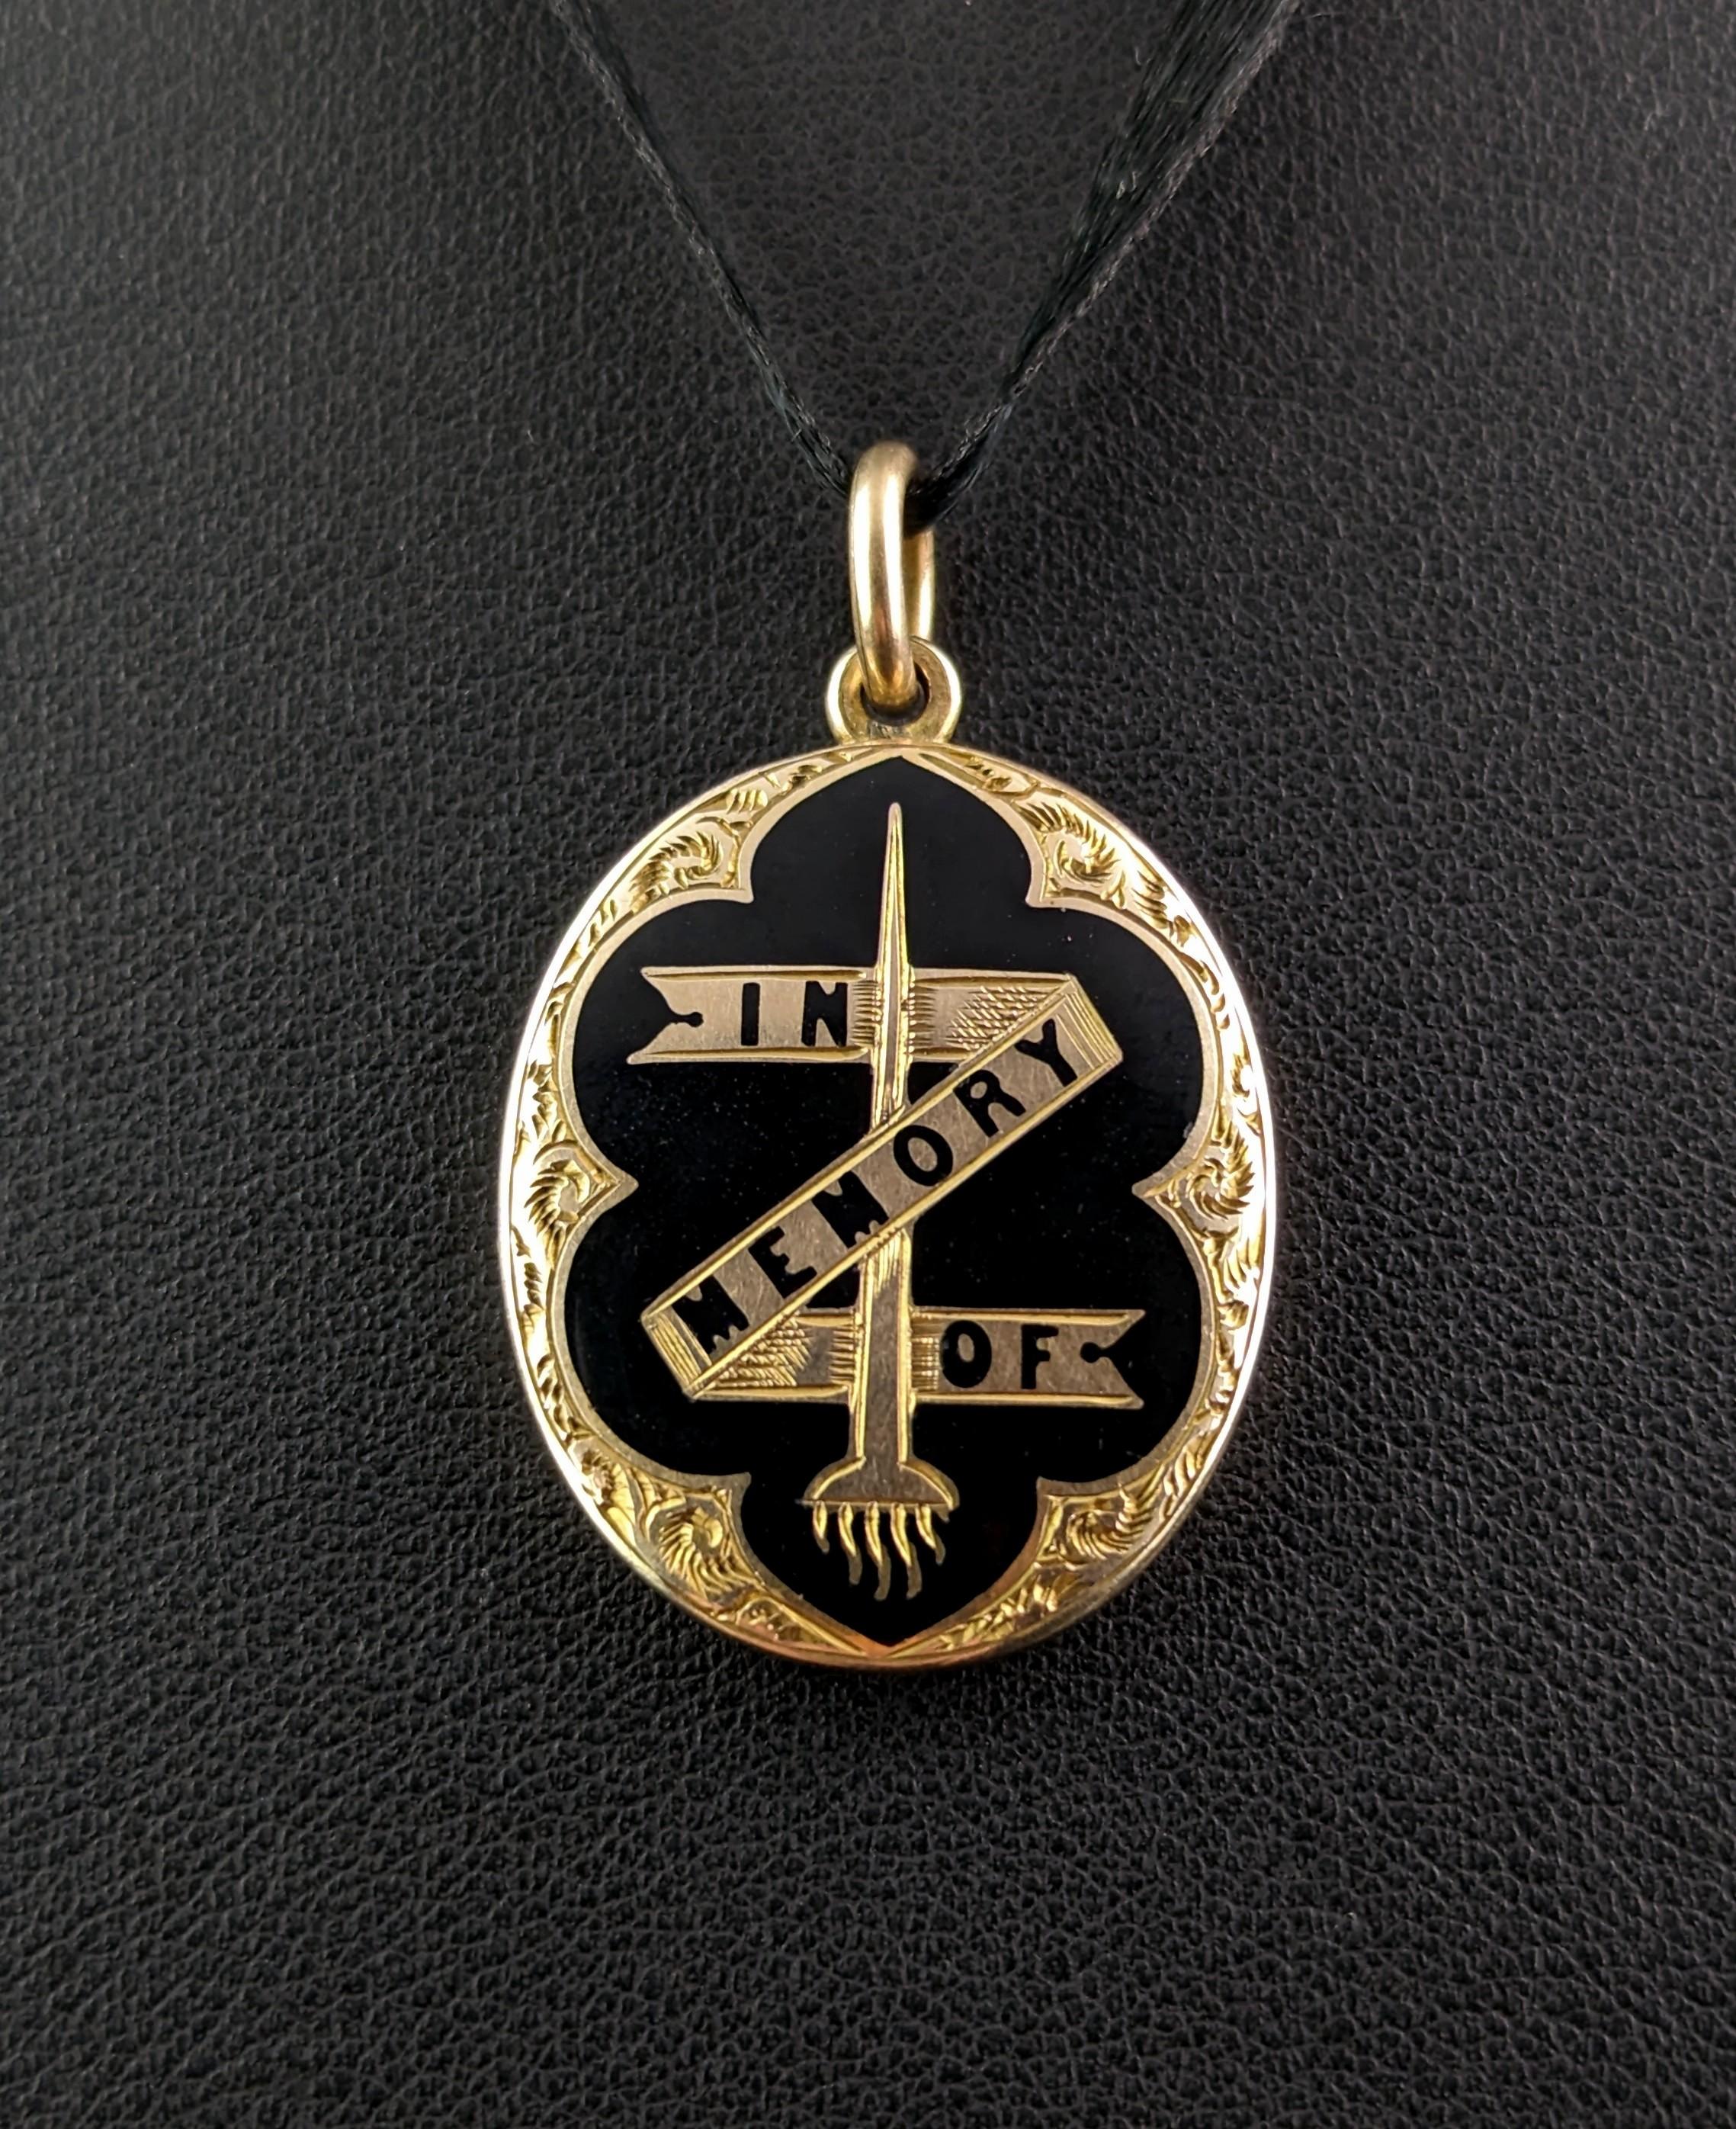 This antique late Victorian era mourning locket is simply beautiful, whether you are an avid mourning jewellery collector or new to Mourning pieces this one is a delight.

It is crafted in a rich 9ct yellow gold with engraved borders, the centre